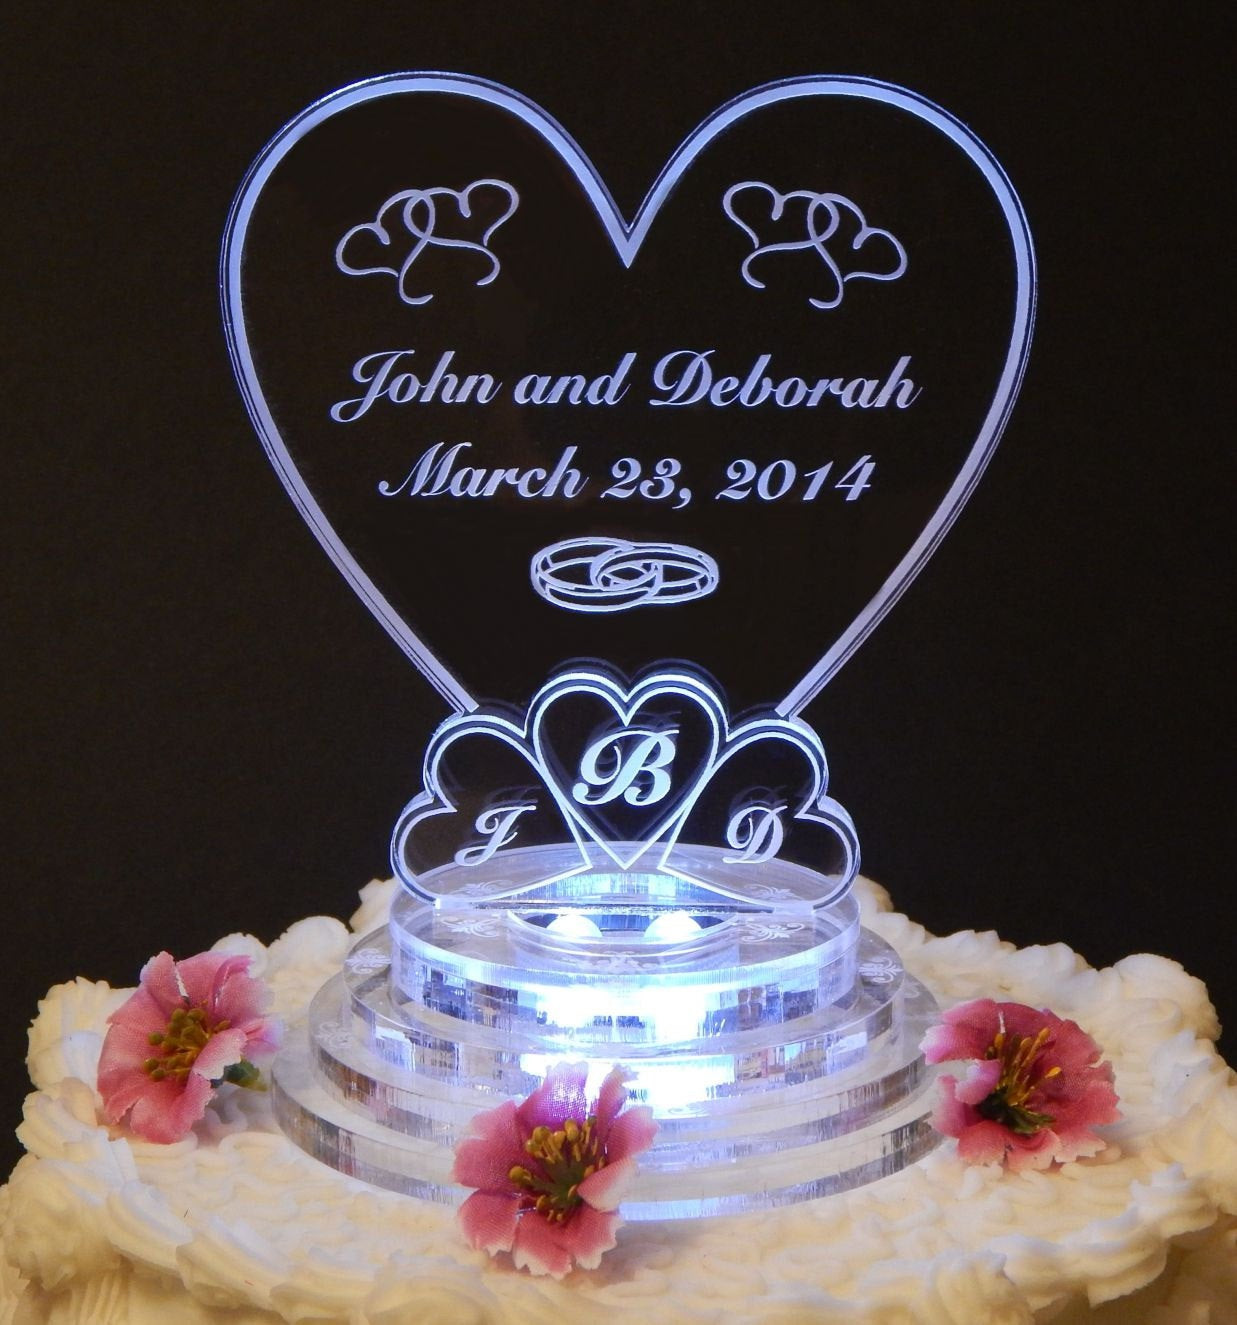 Heart Wedding Cake Toppers
 Lit Personalized Monogram Heart Wedding Cake Topper Top